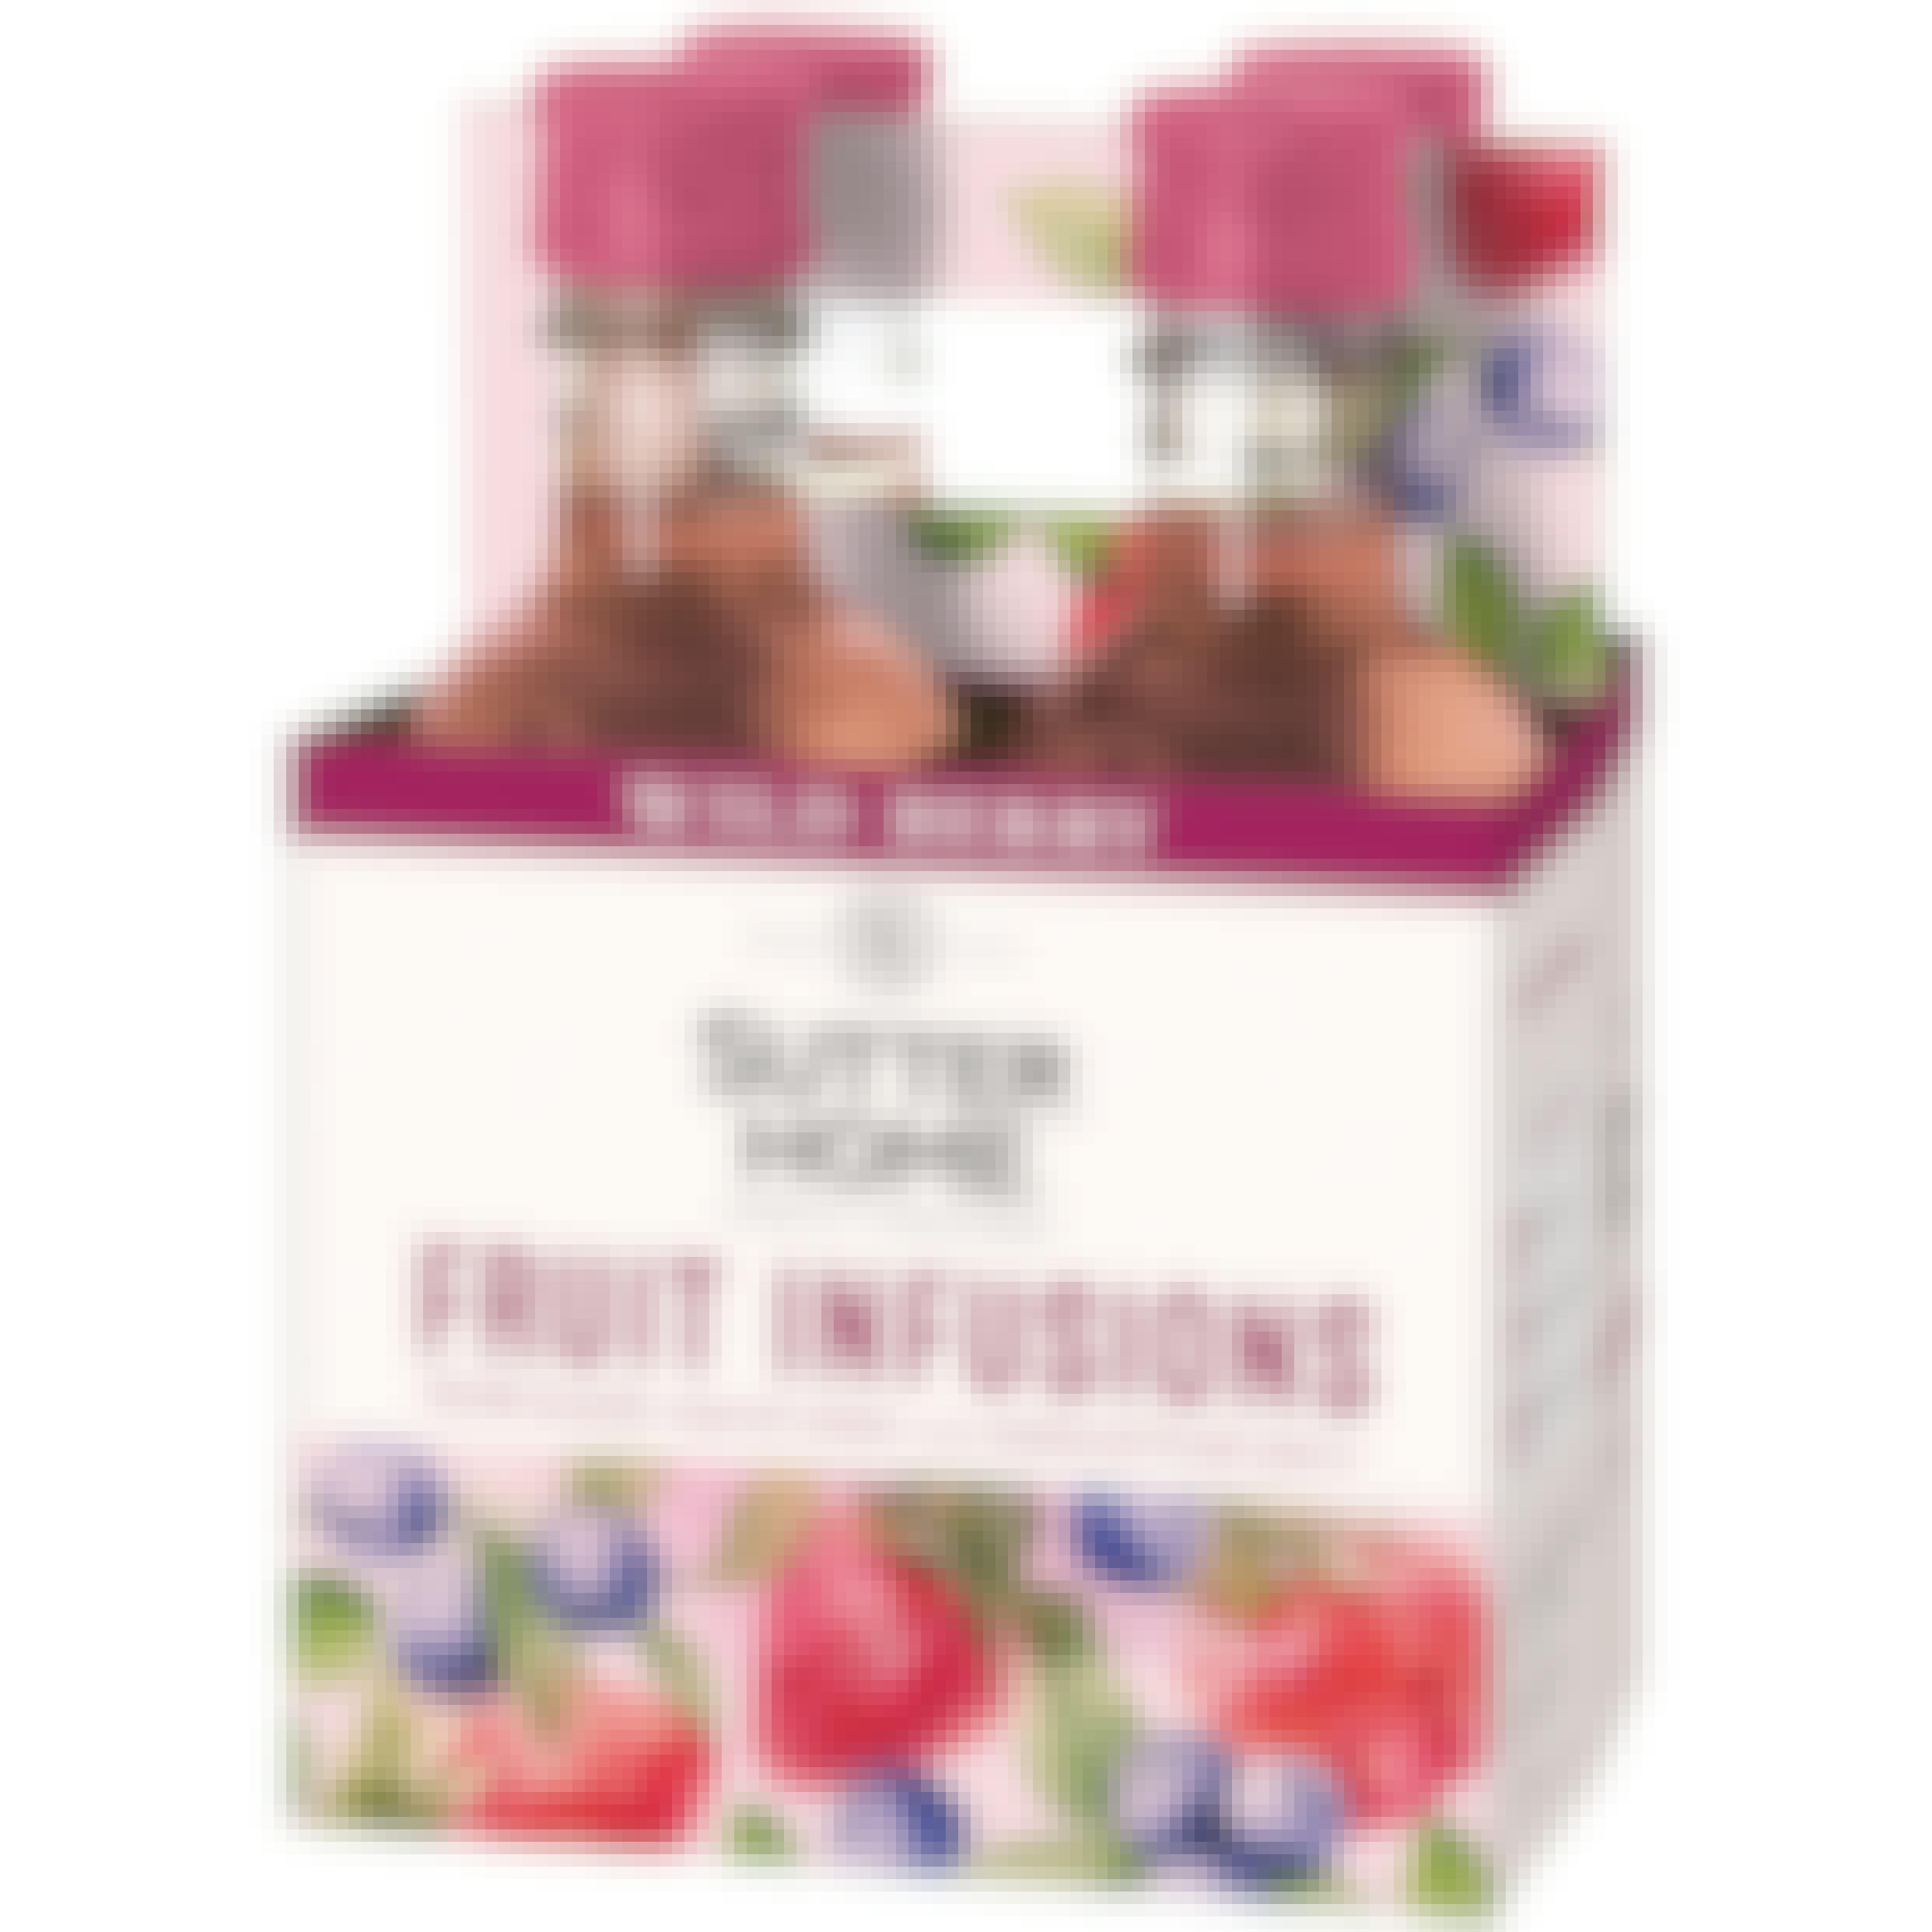 Sutter Home Fruit Infusions Wild Berry 4 pack 187ml Plastic Bottle